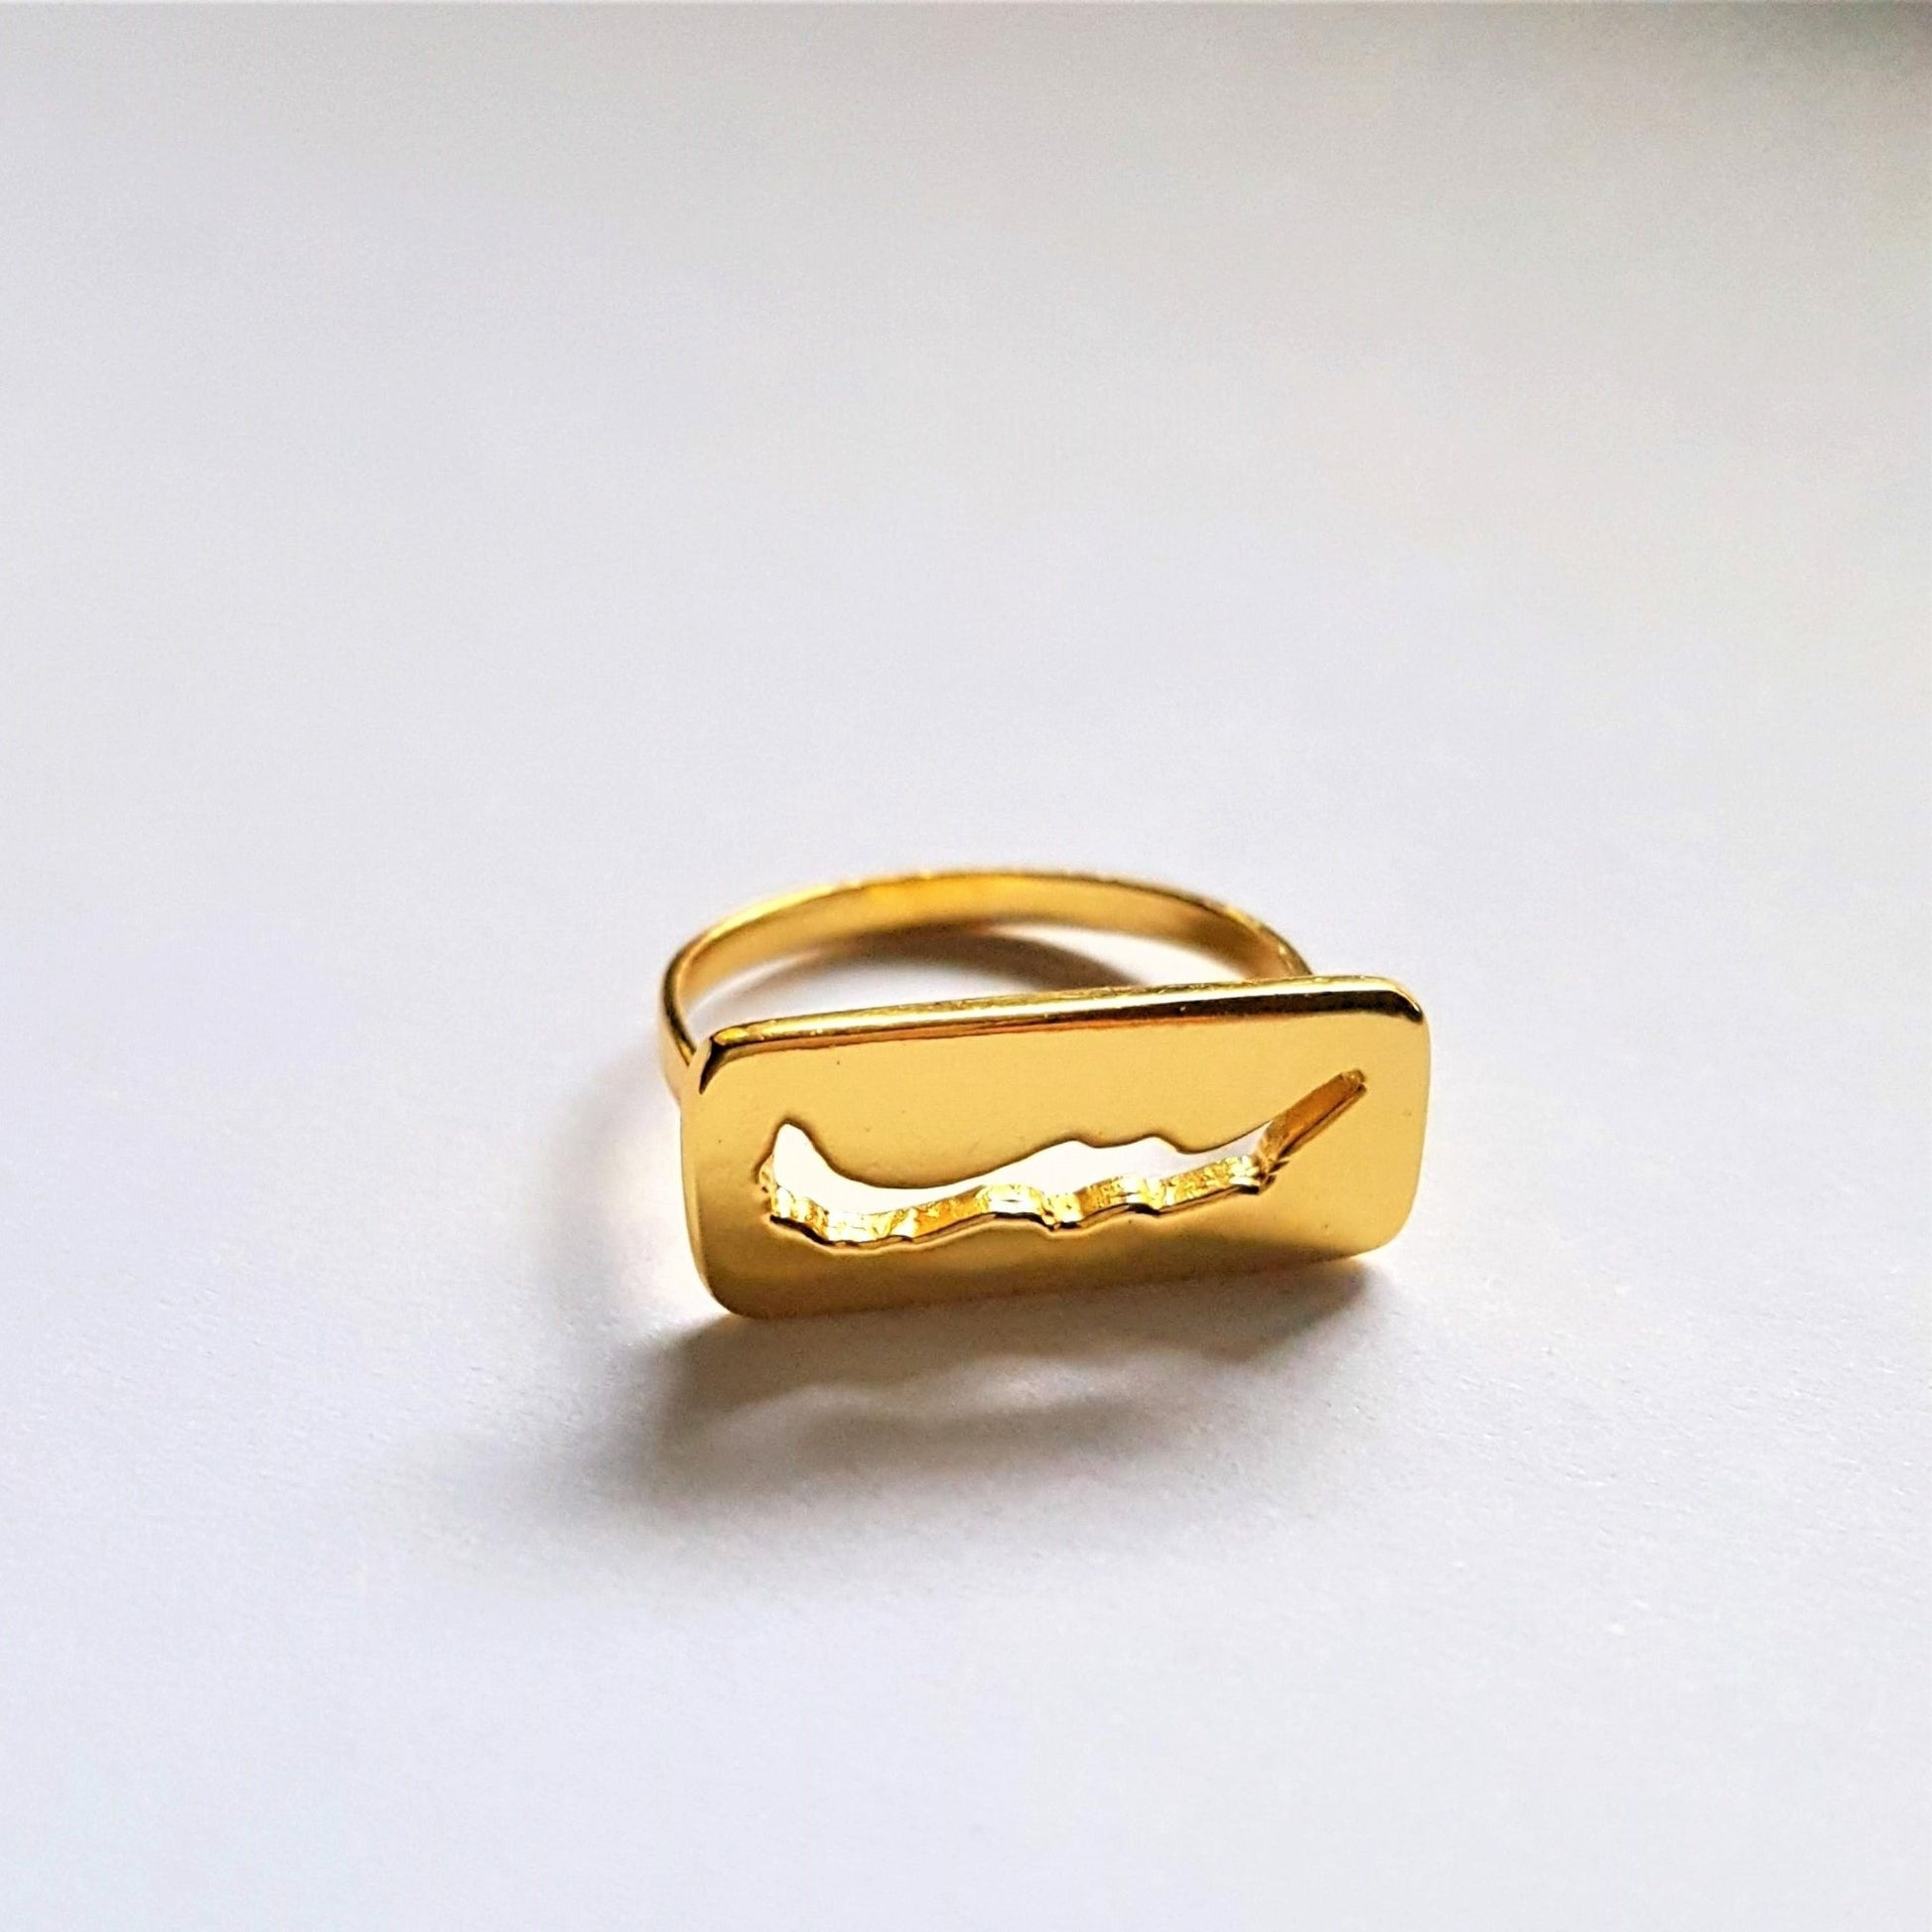 18k plated yellow gold - size 7 Savary island ring with savary island shape cut out of rectangle